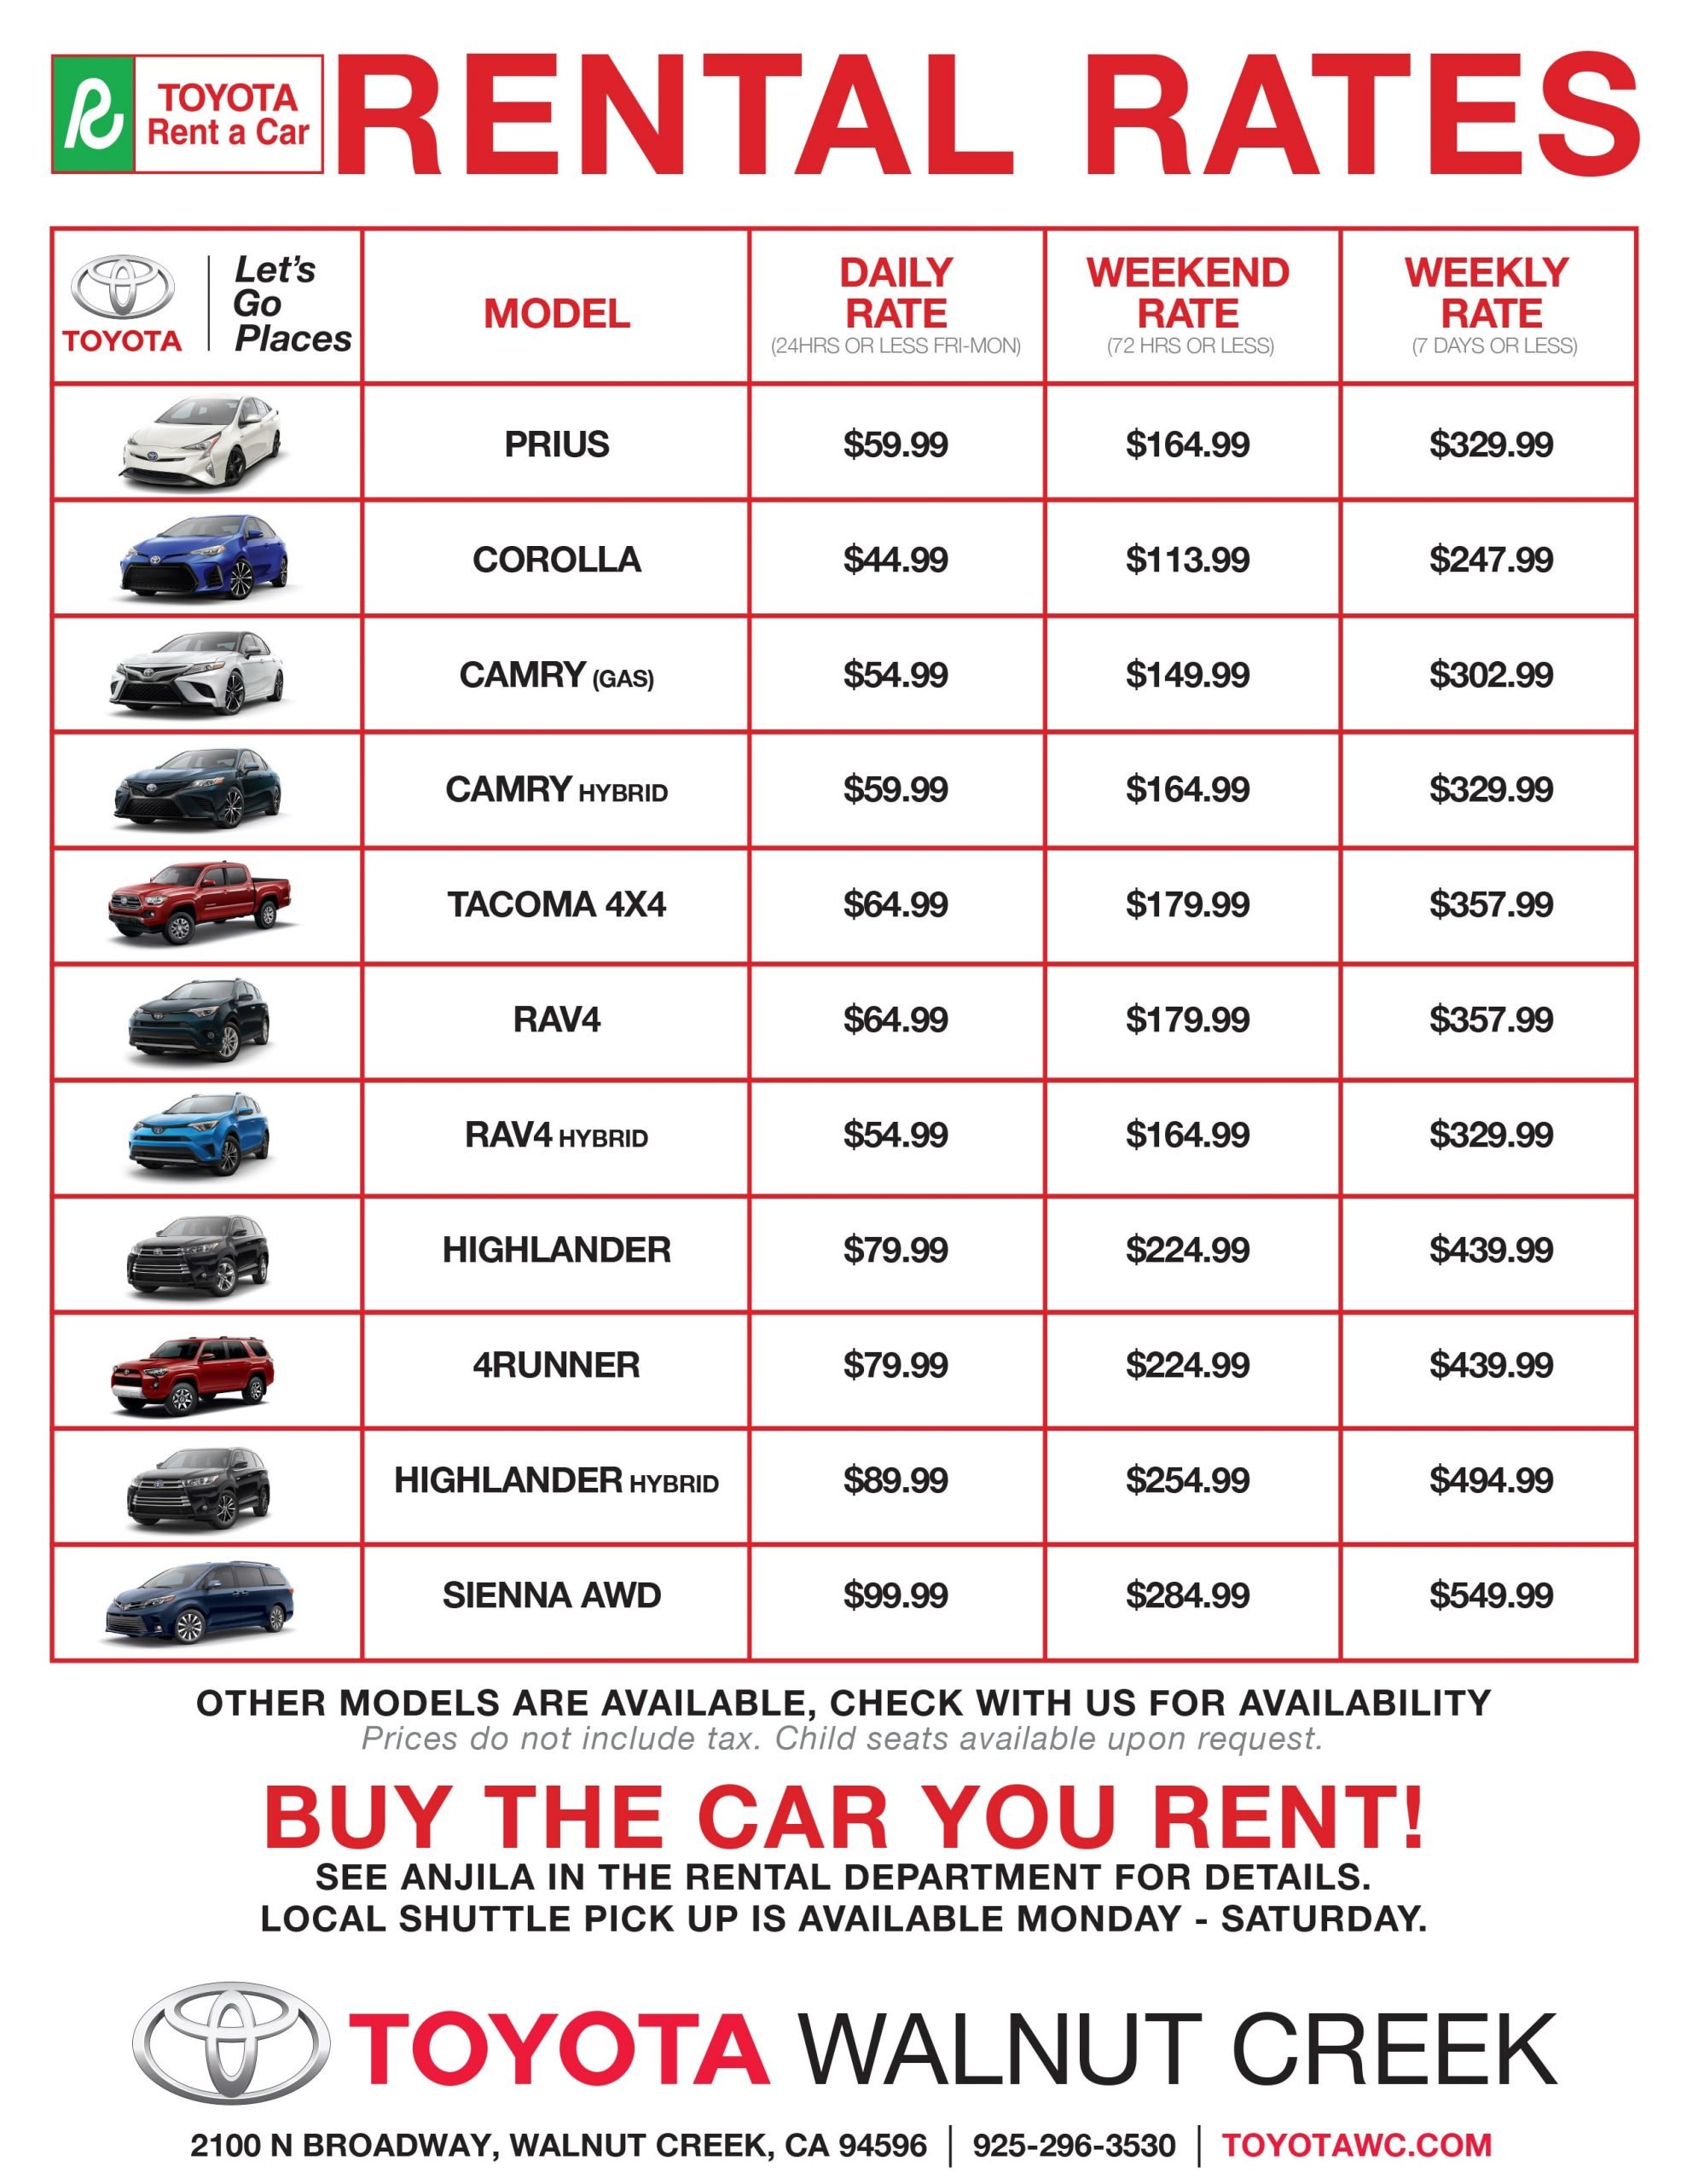 How Much Does It Cost To Rent A Car For A Week In California